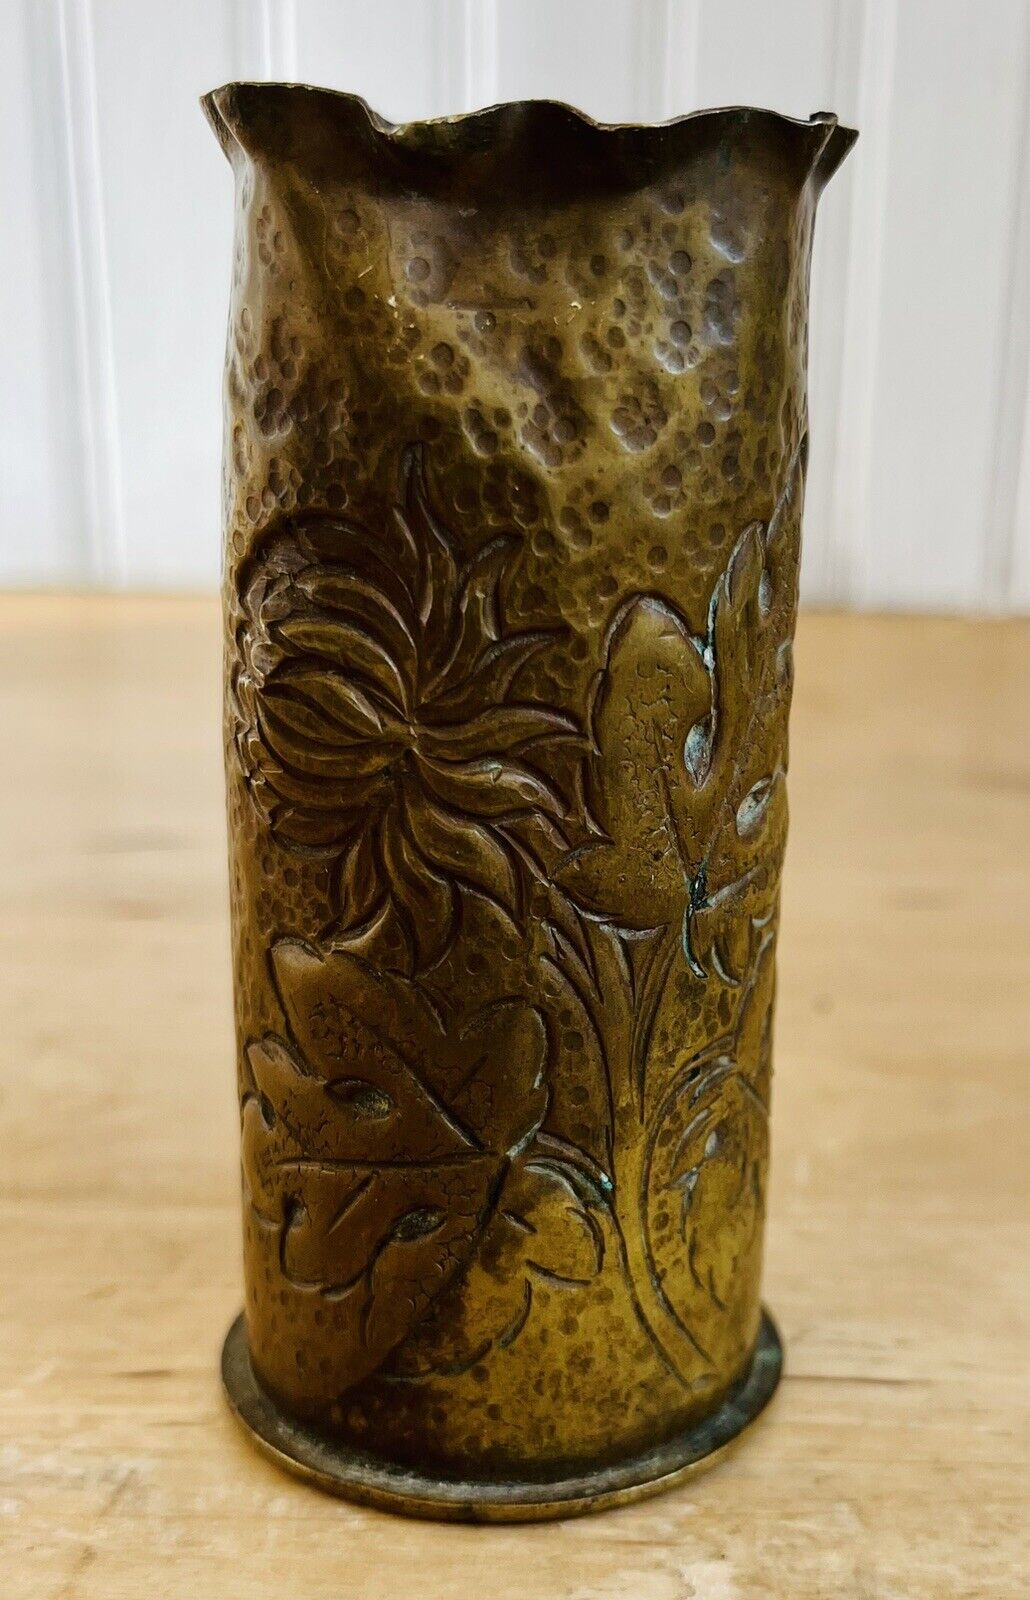 1916 PEMCO WW1 37 MM Trench Art Artillery Shell FLORAL ART NOUVEAU STYLE